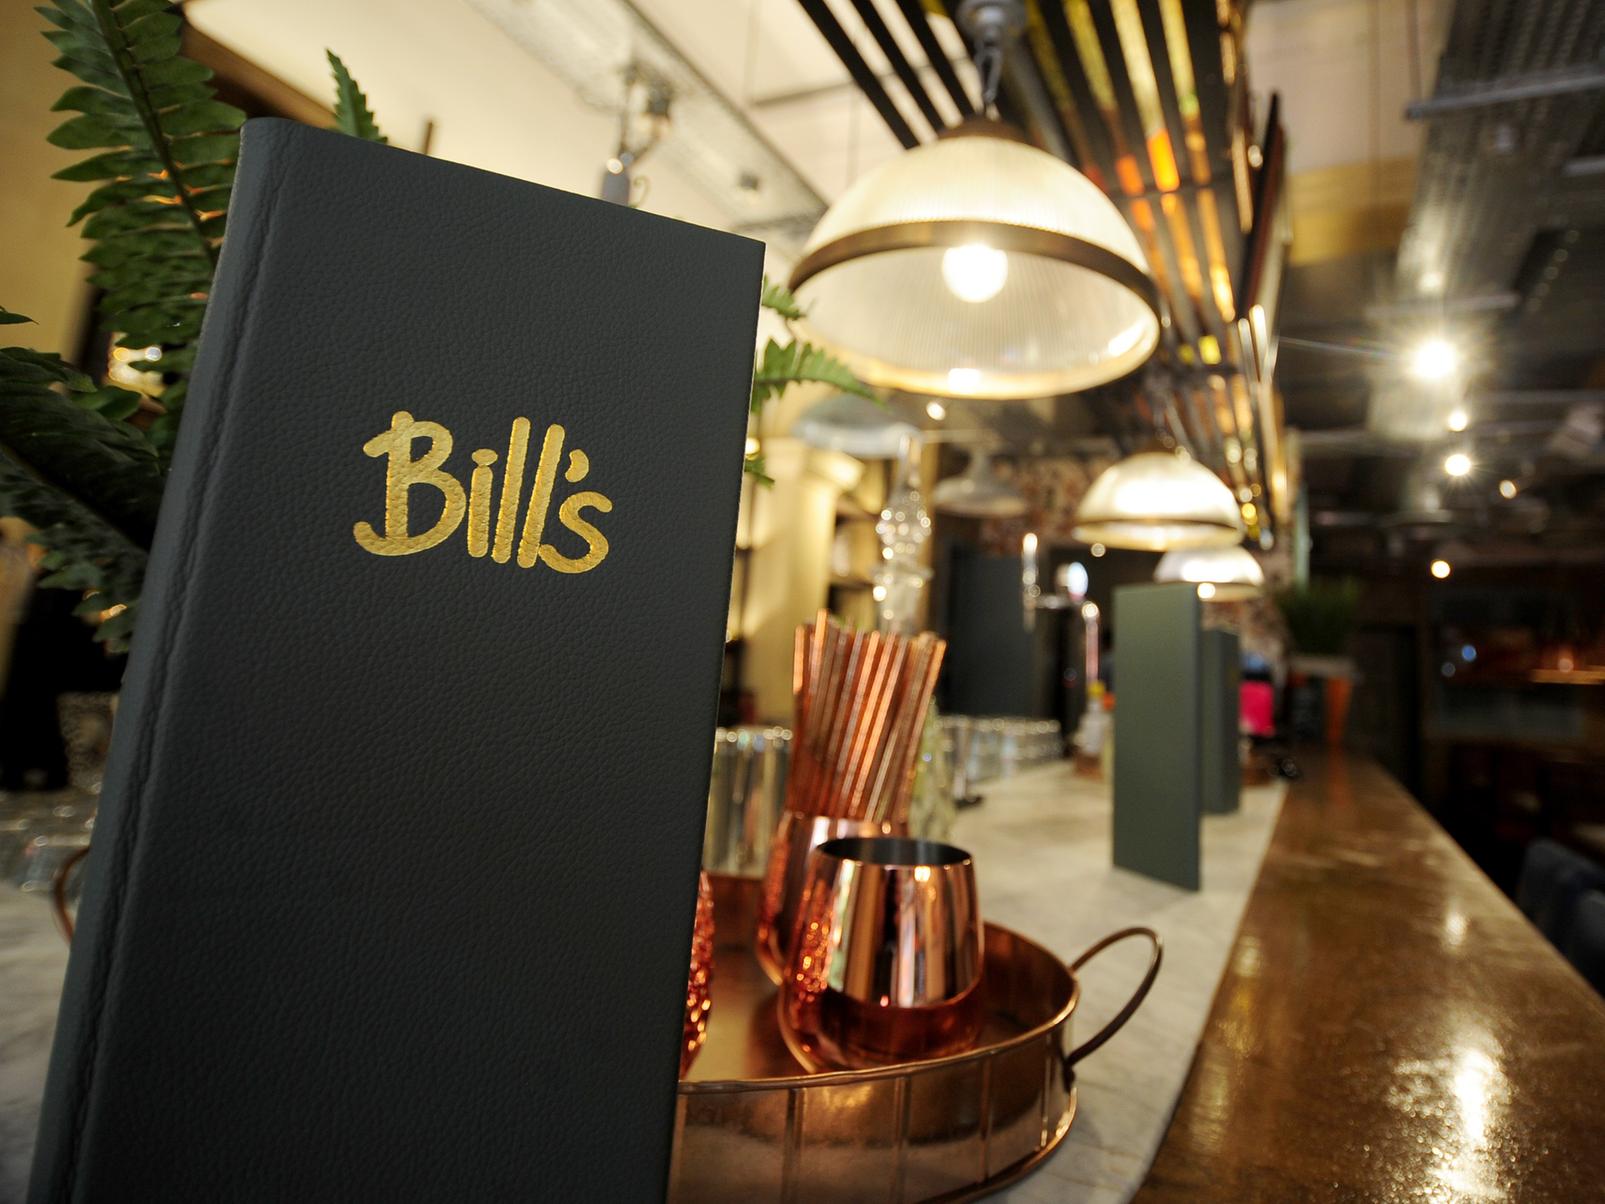 Founded by greengrocer Bill Collison, Bill's on Albion Place keeps to a simple British menu made with fresh and seasonal ingredients. A range of options are available for vegans.